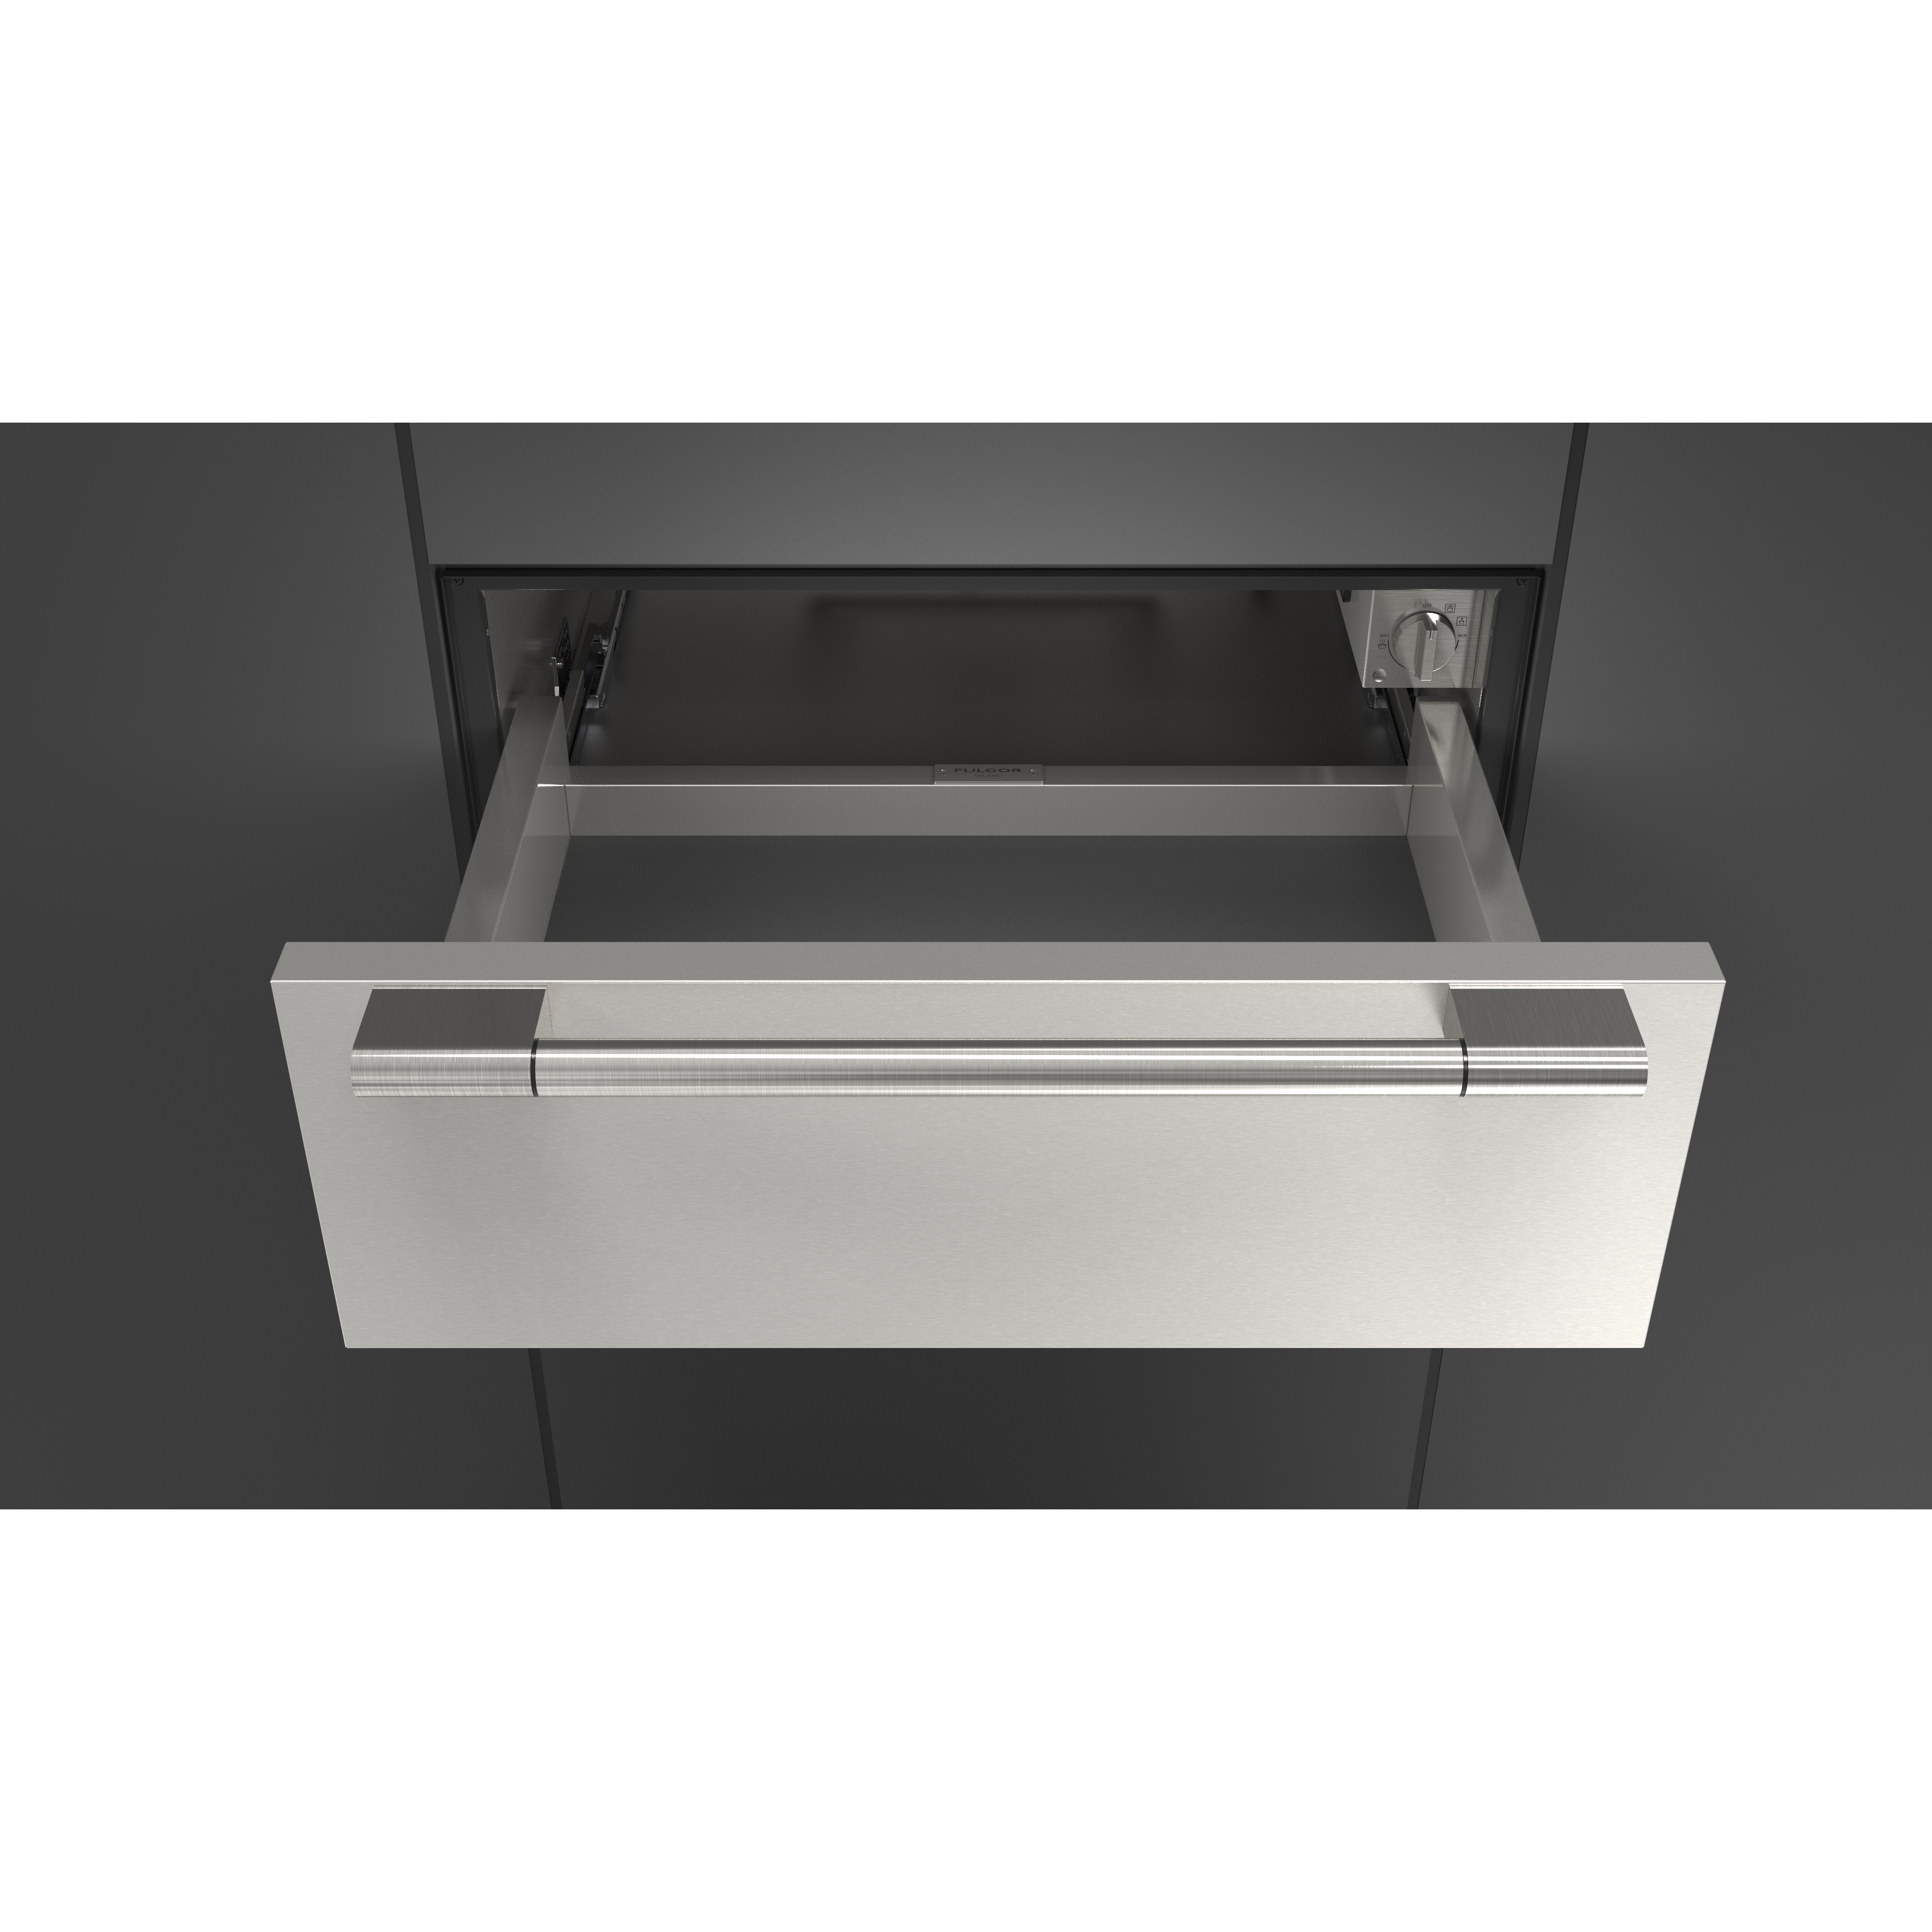 Fulgor Milano 30" Warming Drawer with 2.1 cu. ft. Capacity - F6PWD30S1